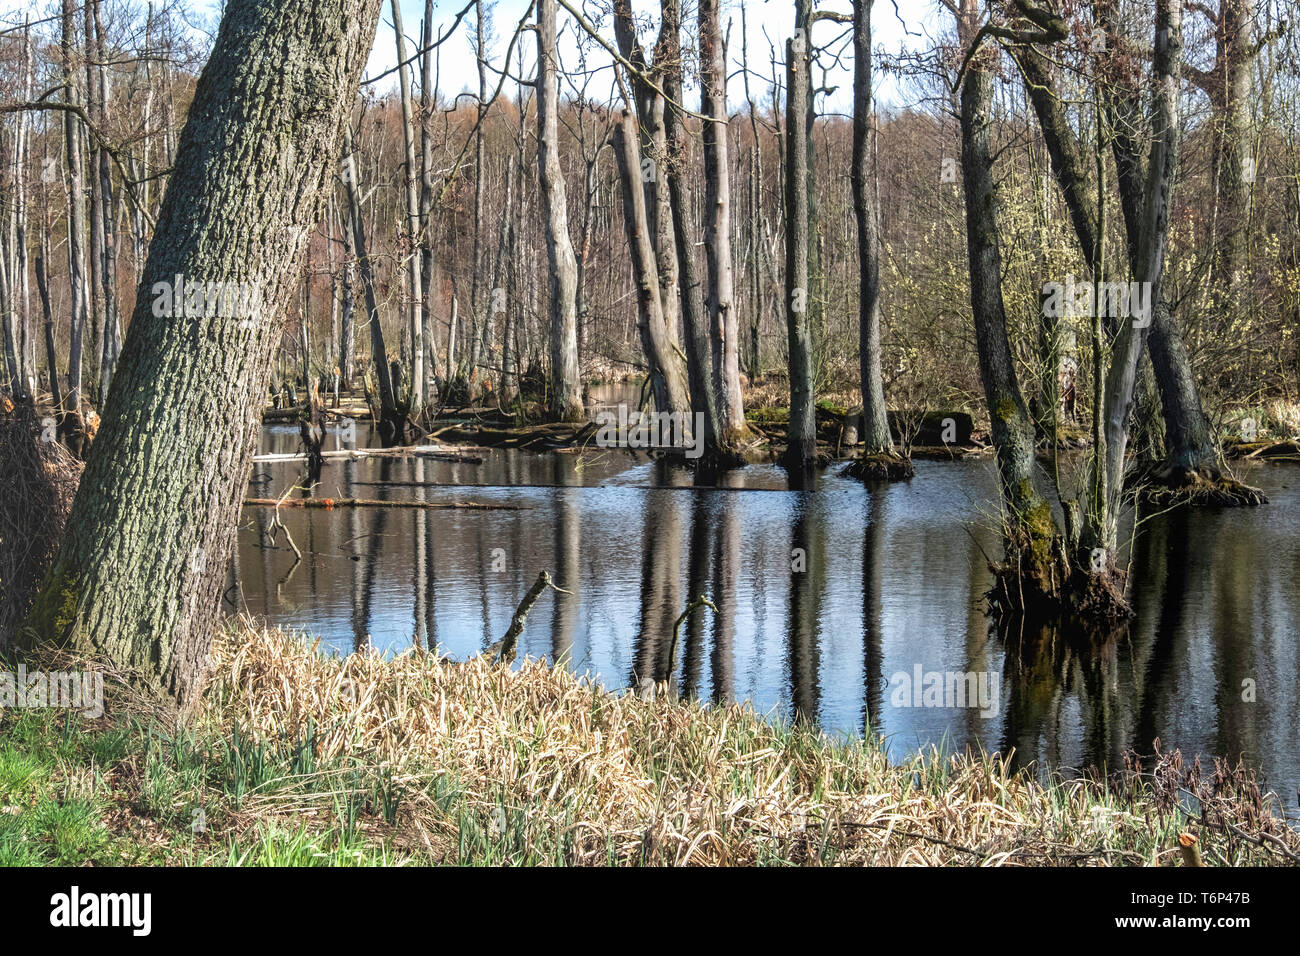 Water & reflections. Boggy swamp area with dead & dying trees next to Luisenhof road, Brandenburg, Germany Stock Photo